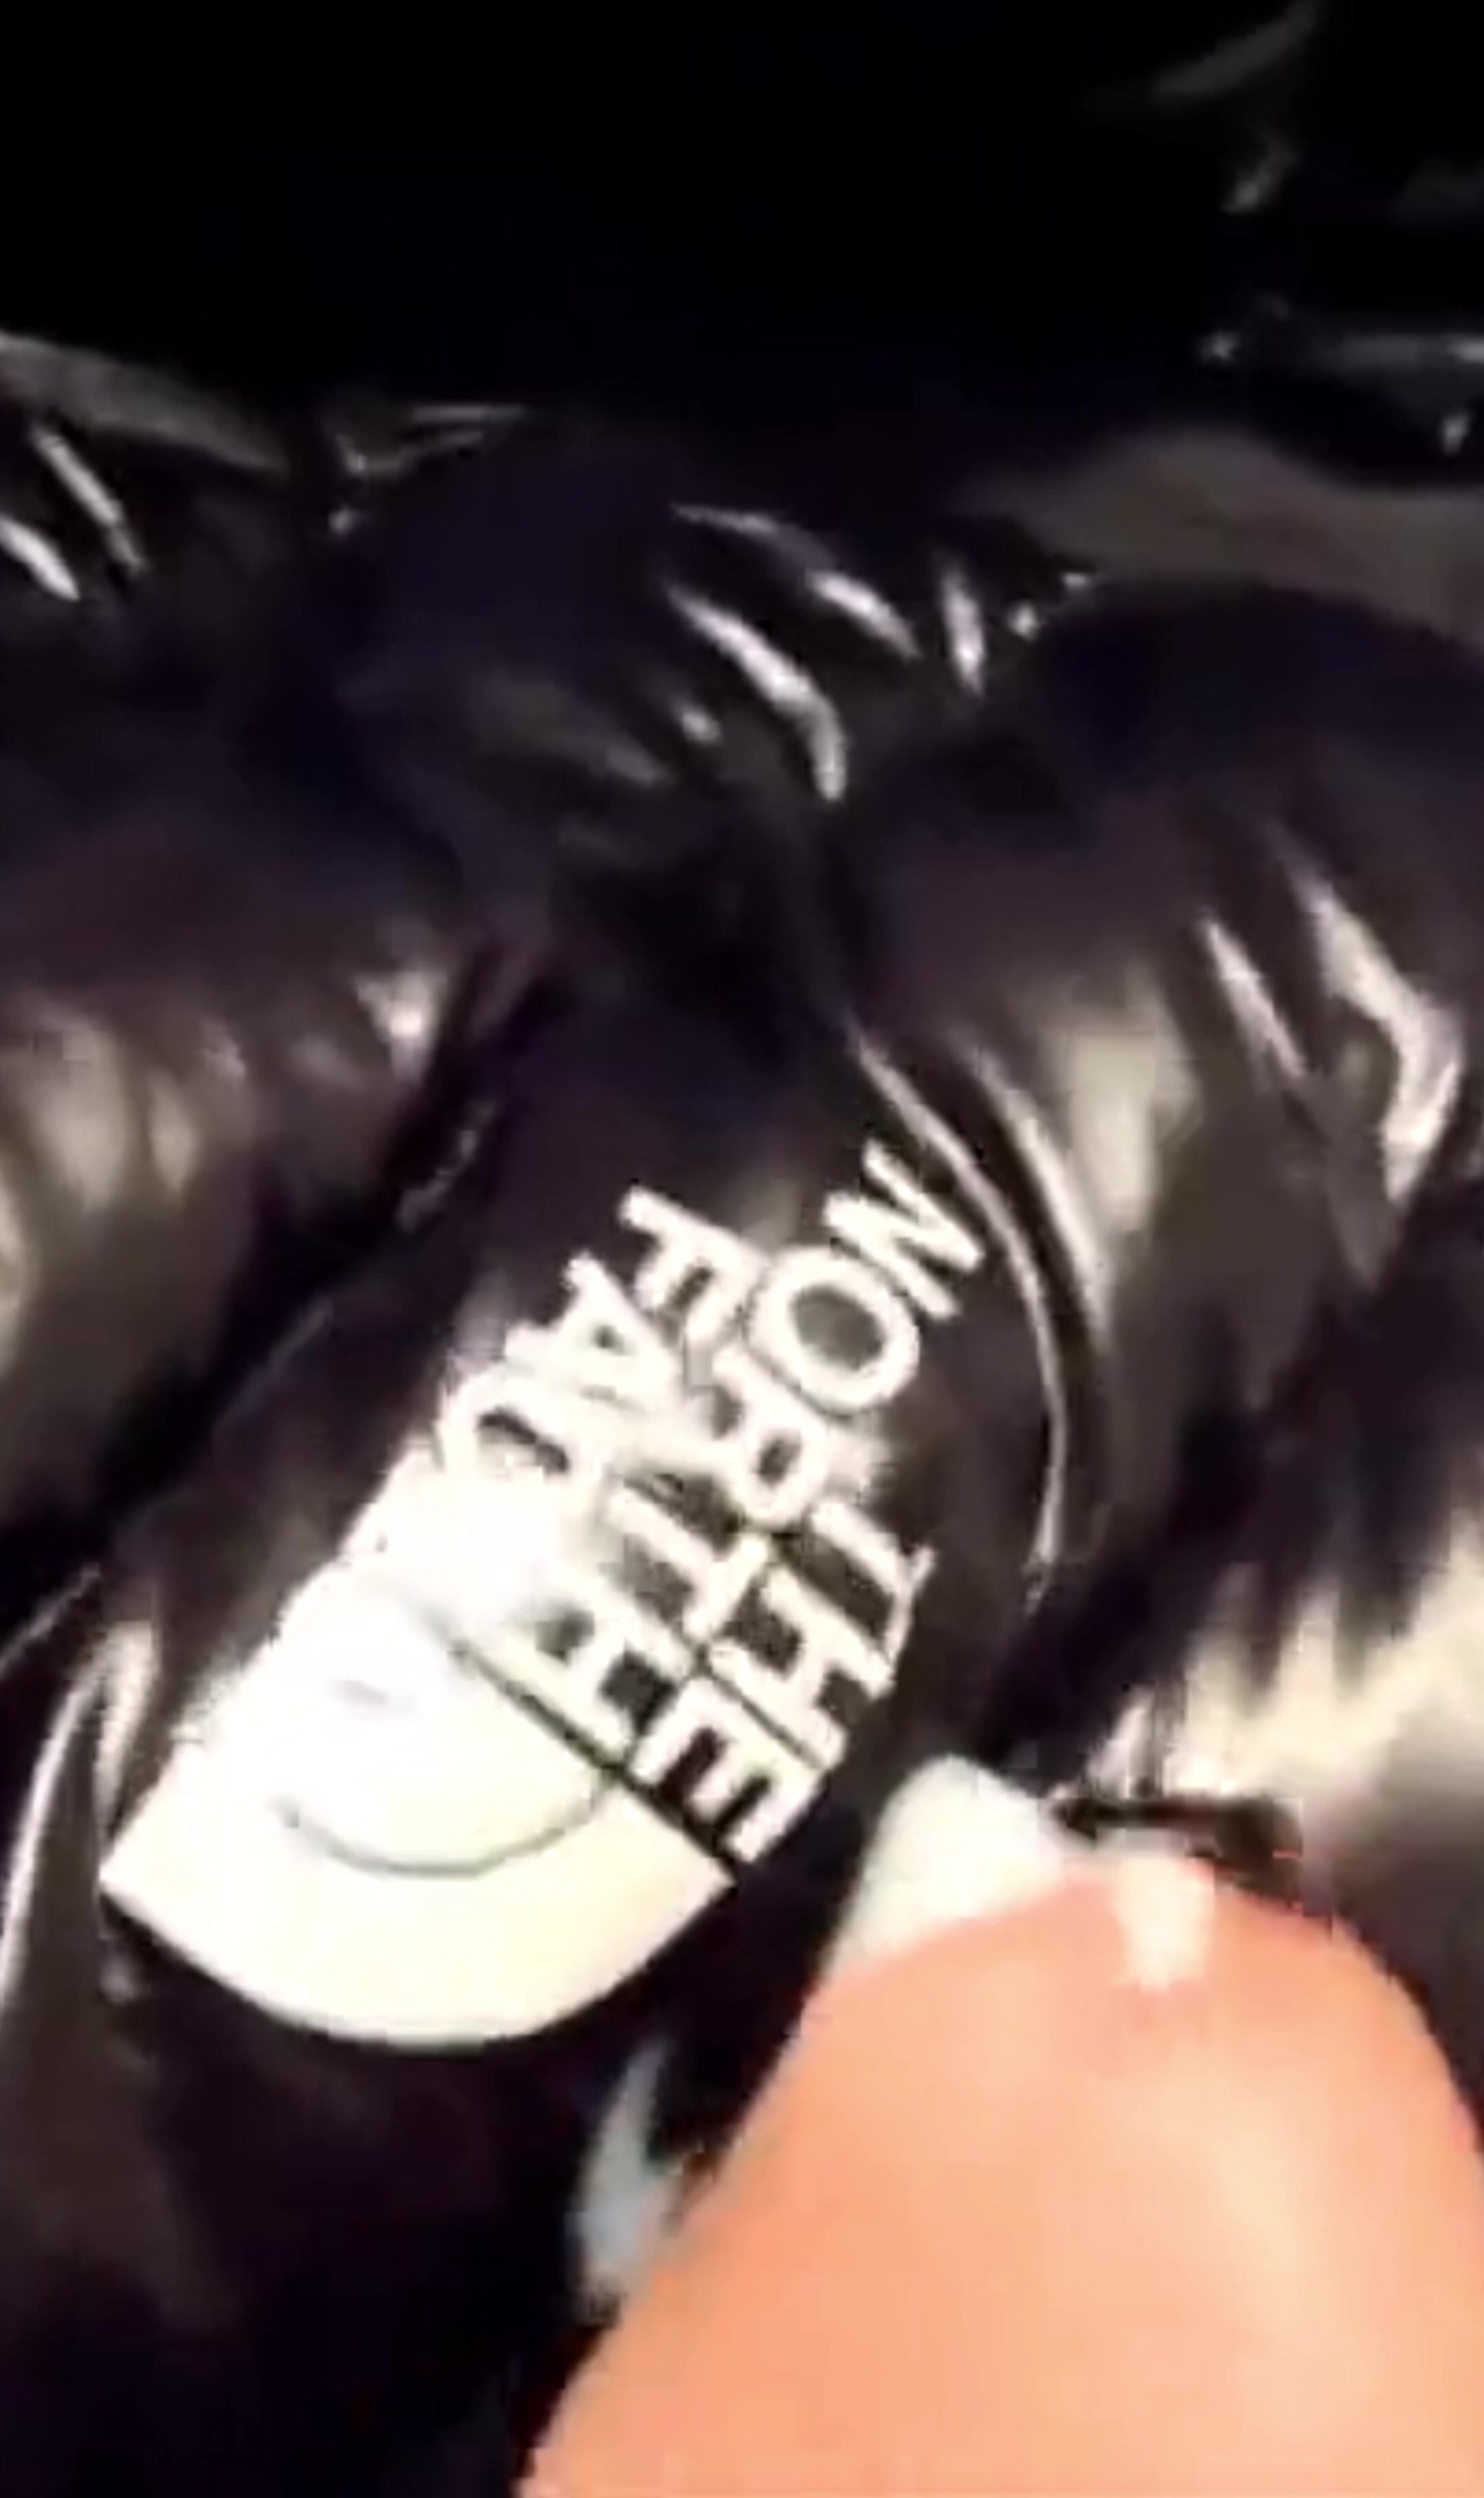 Lad Cums On North Face Puffer Jacket